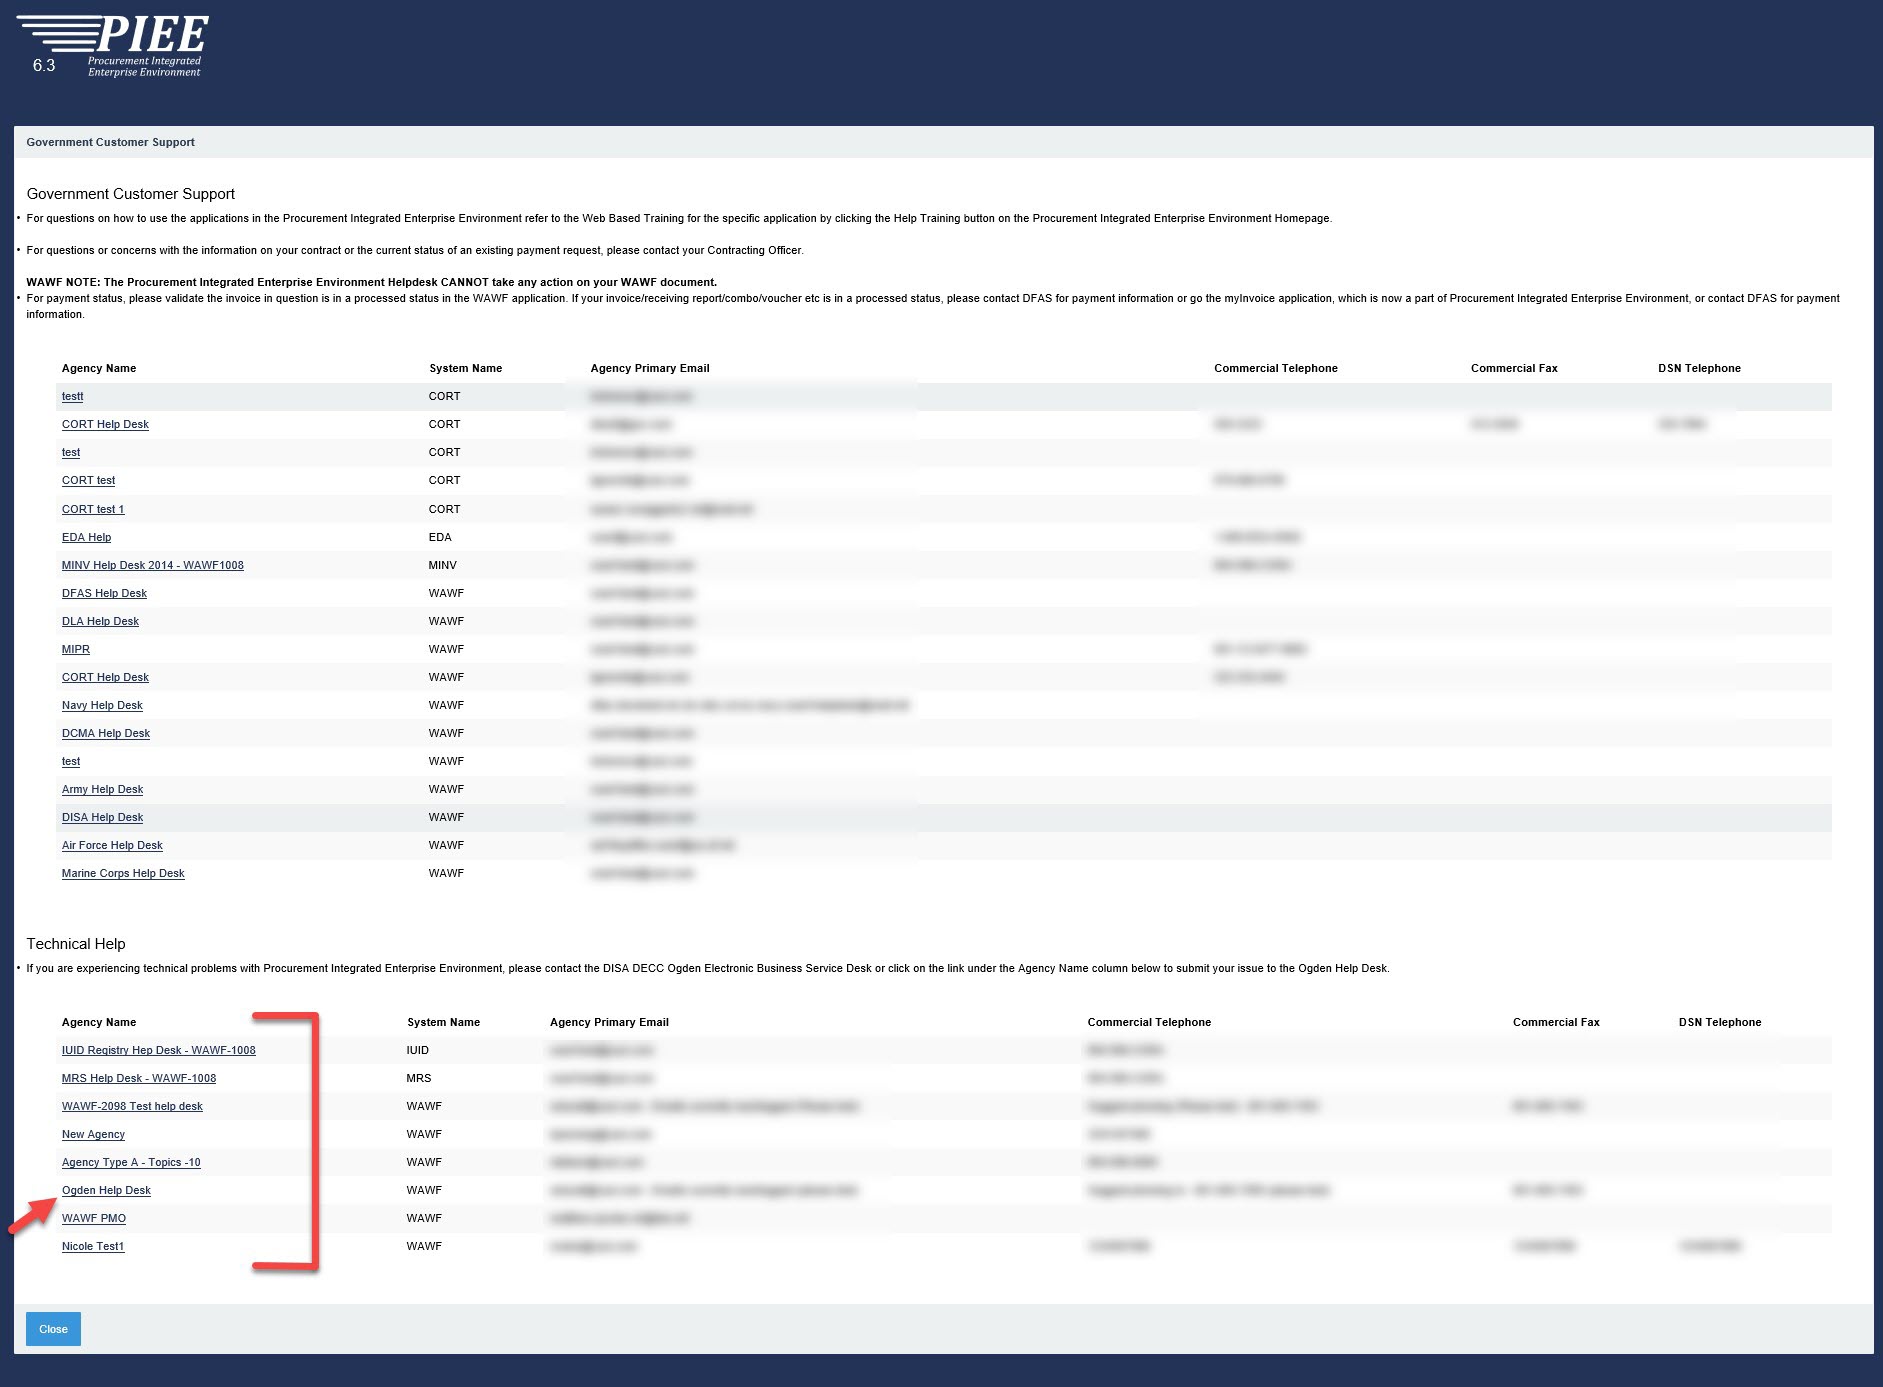 The image provides a preview of the Customer Support Agency list page.